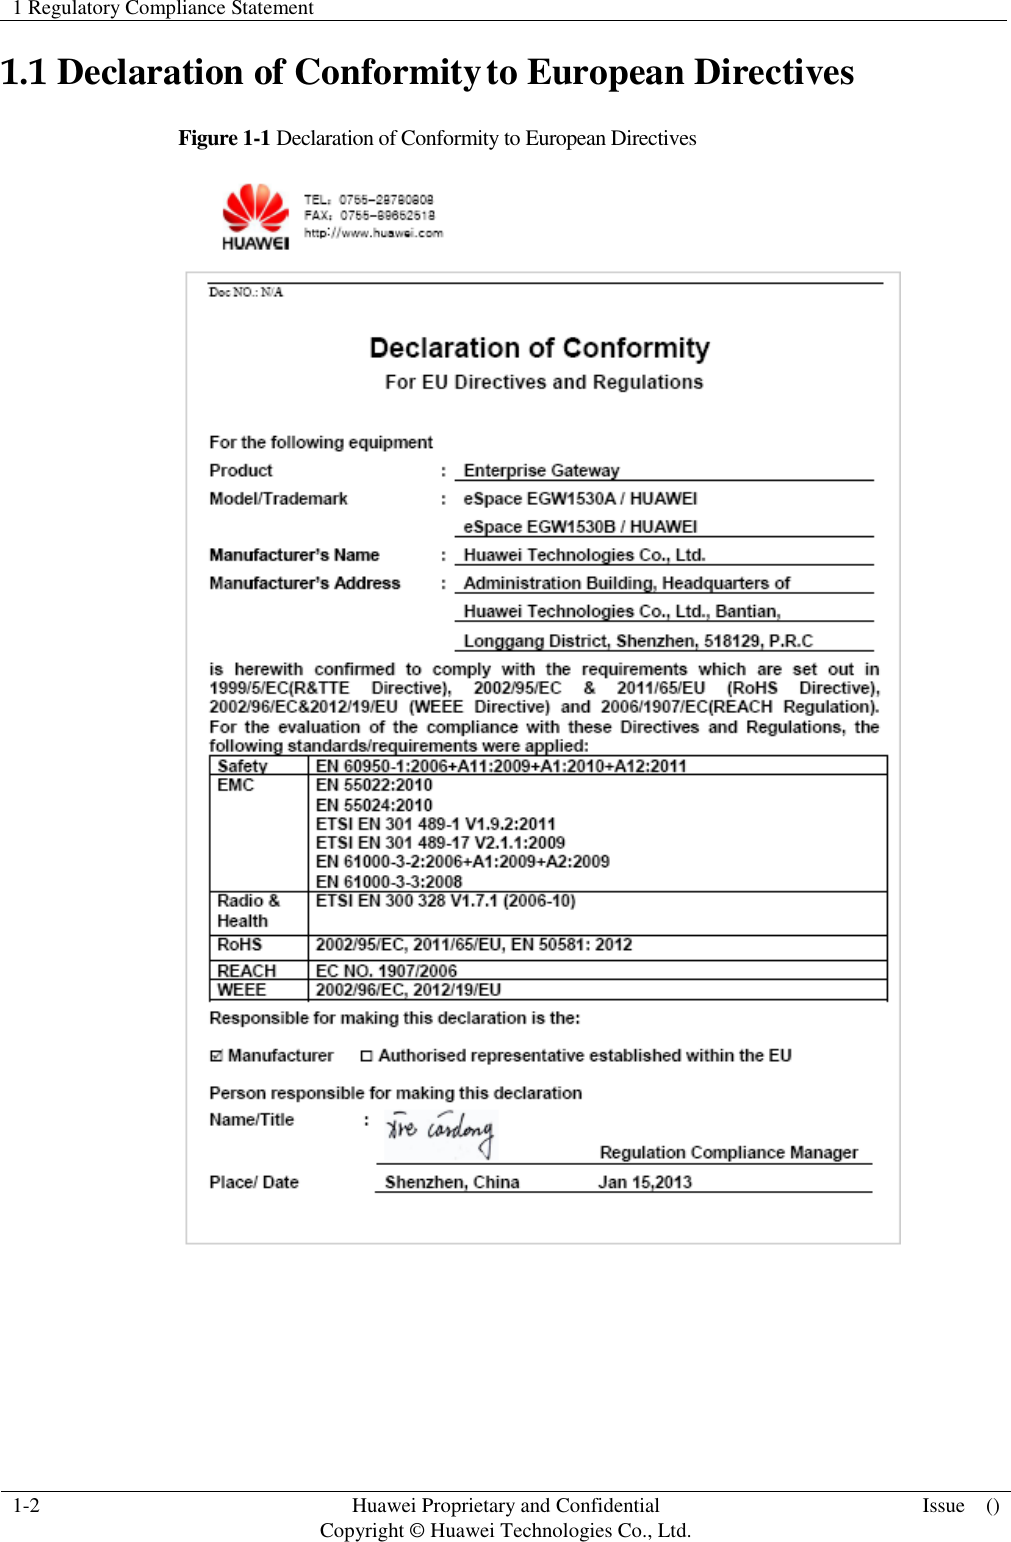 1 Regulatory Compliance Statement    1-2 Huawei Proprietary and Confidential                                     Copyright © Huawei Technologies Co., Ltd. Issue    ()  1.1 Declaration of Conformity to European Directives Figure 1-1 Declaration of Conformity to European Directives    